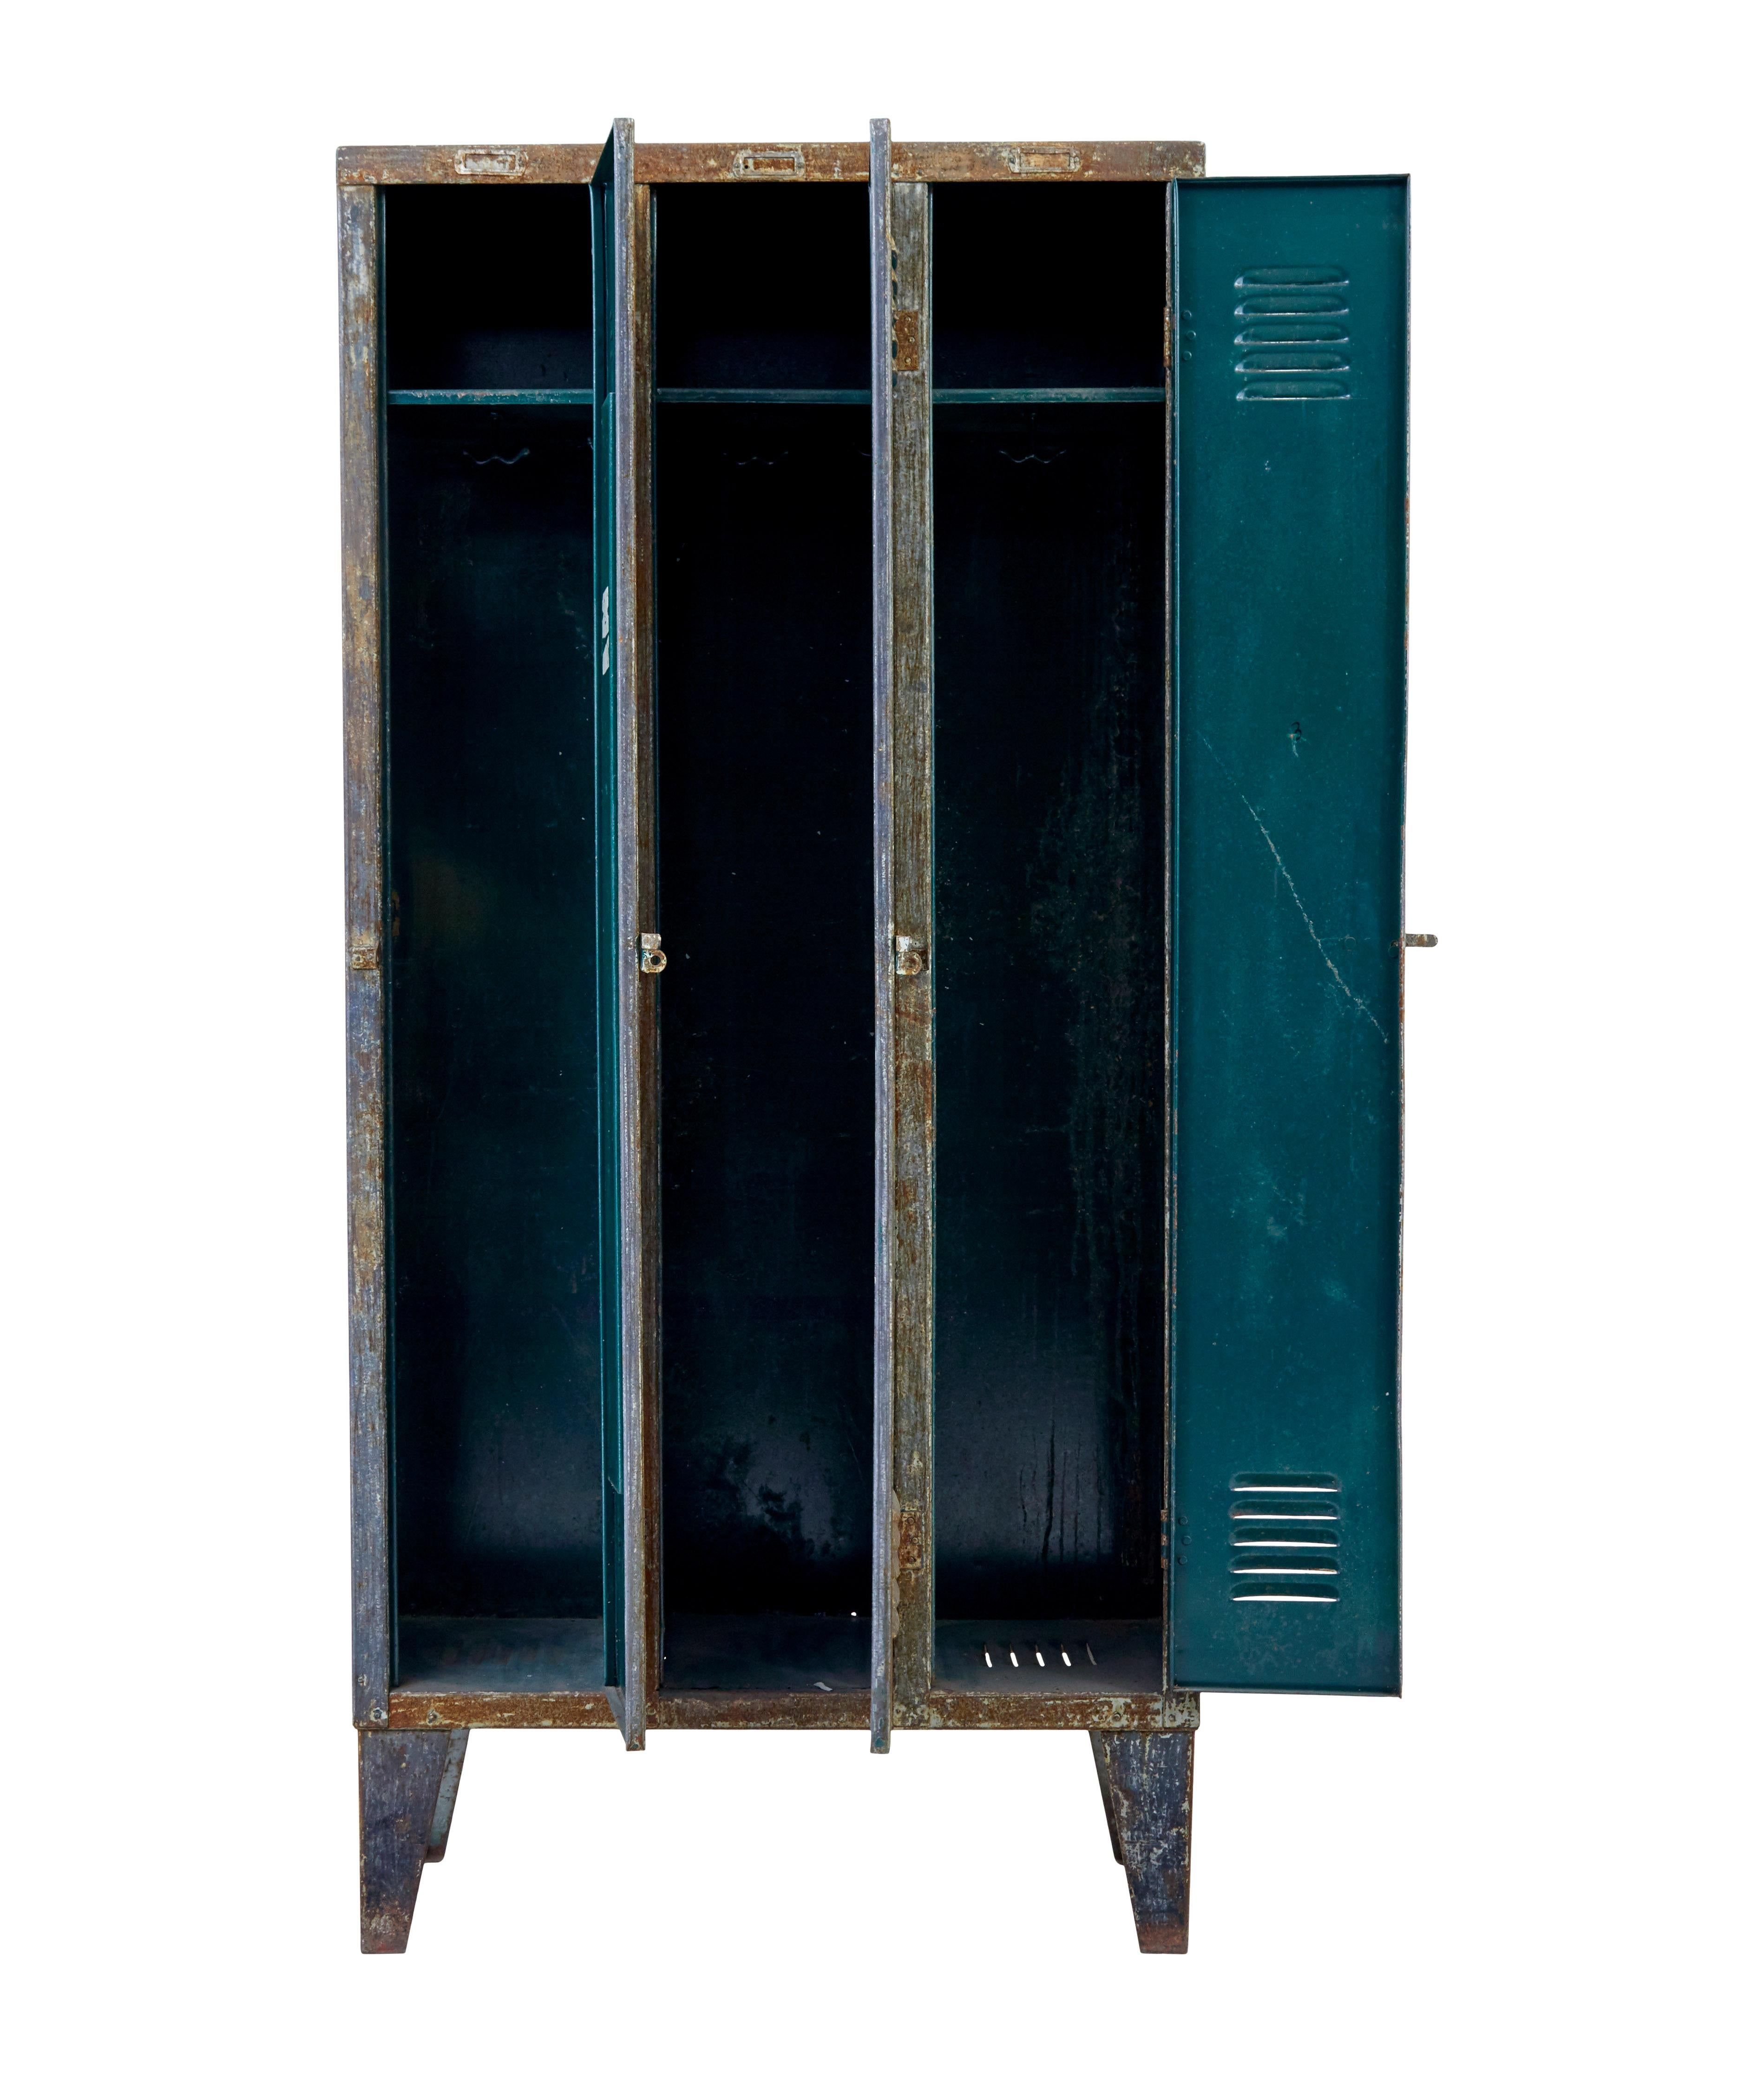 Mid 20th century distressed industrial cabinet circa 1960.

3 door cabinet with a single shelf in each compartment.

Partially stripped back to bare metal some years ago this piece has now taken on a weathered and distressed appearance.

Ideal for